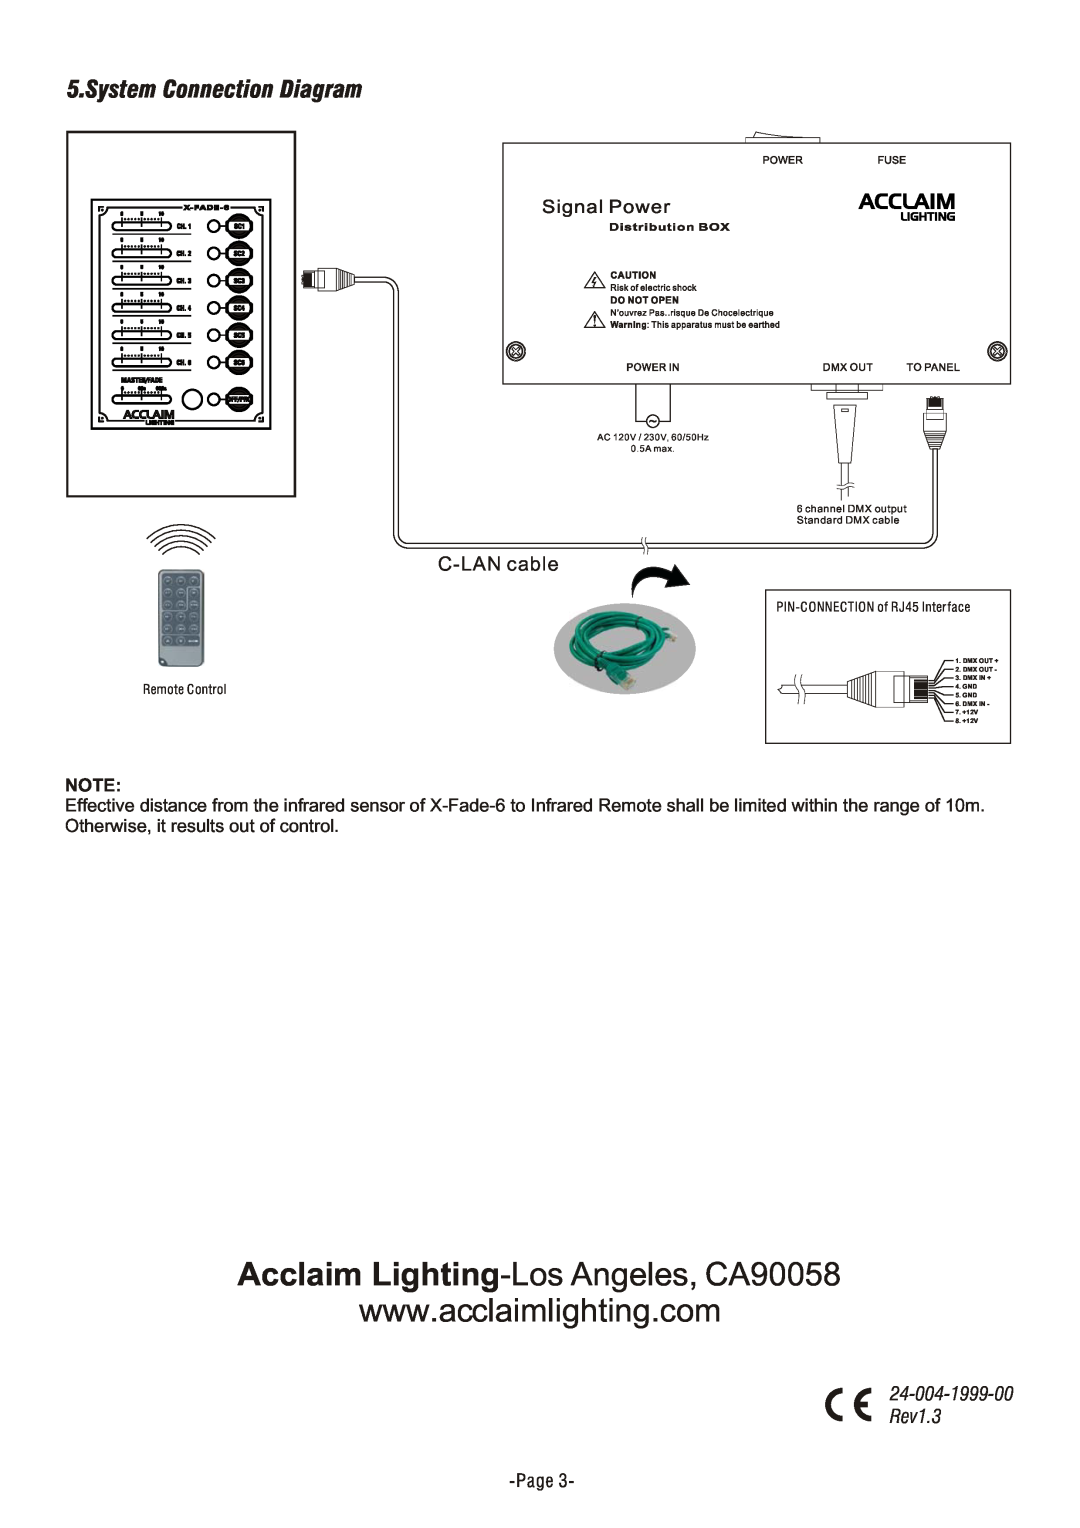 Acclaim Lighting X-FADE-6 System Connection Diagram, Acclaim Lighting-Los Angeles, CA90058, 24-004-1999-00 Rev1.3, Dmx Out 